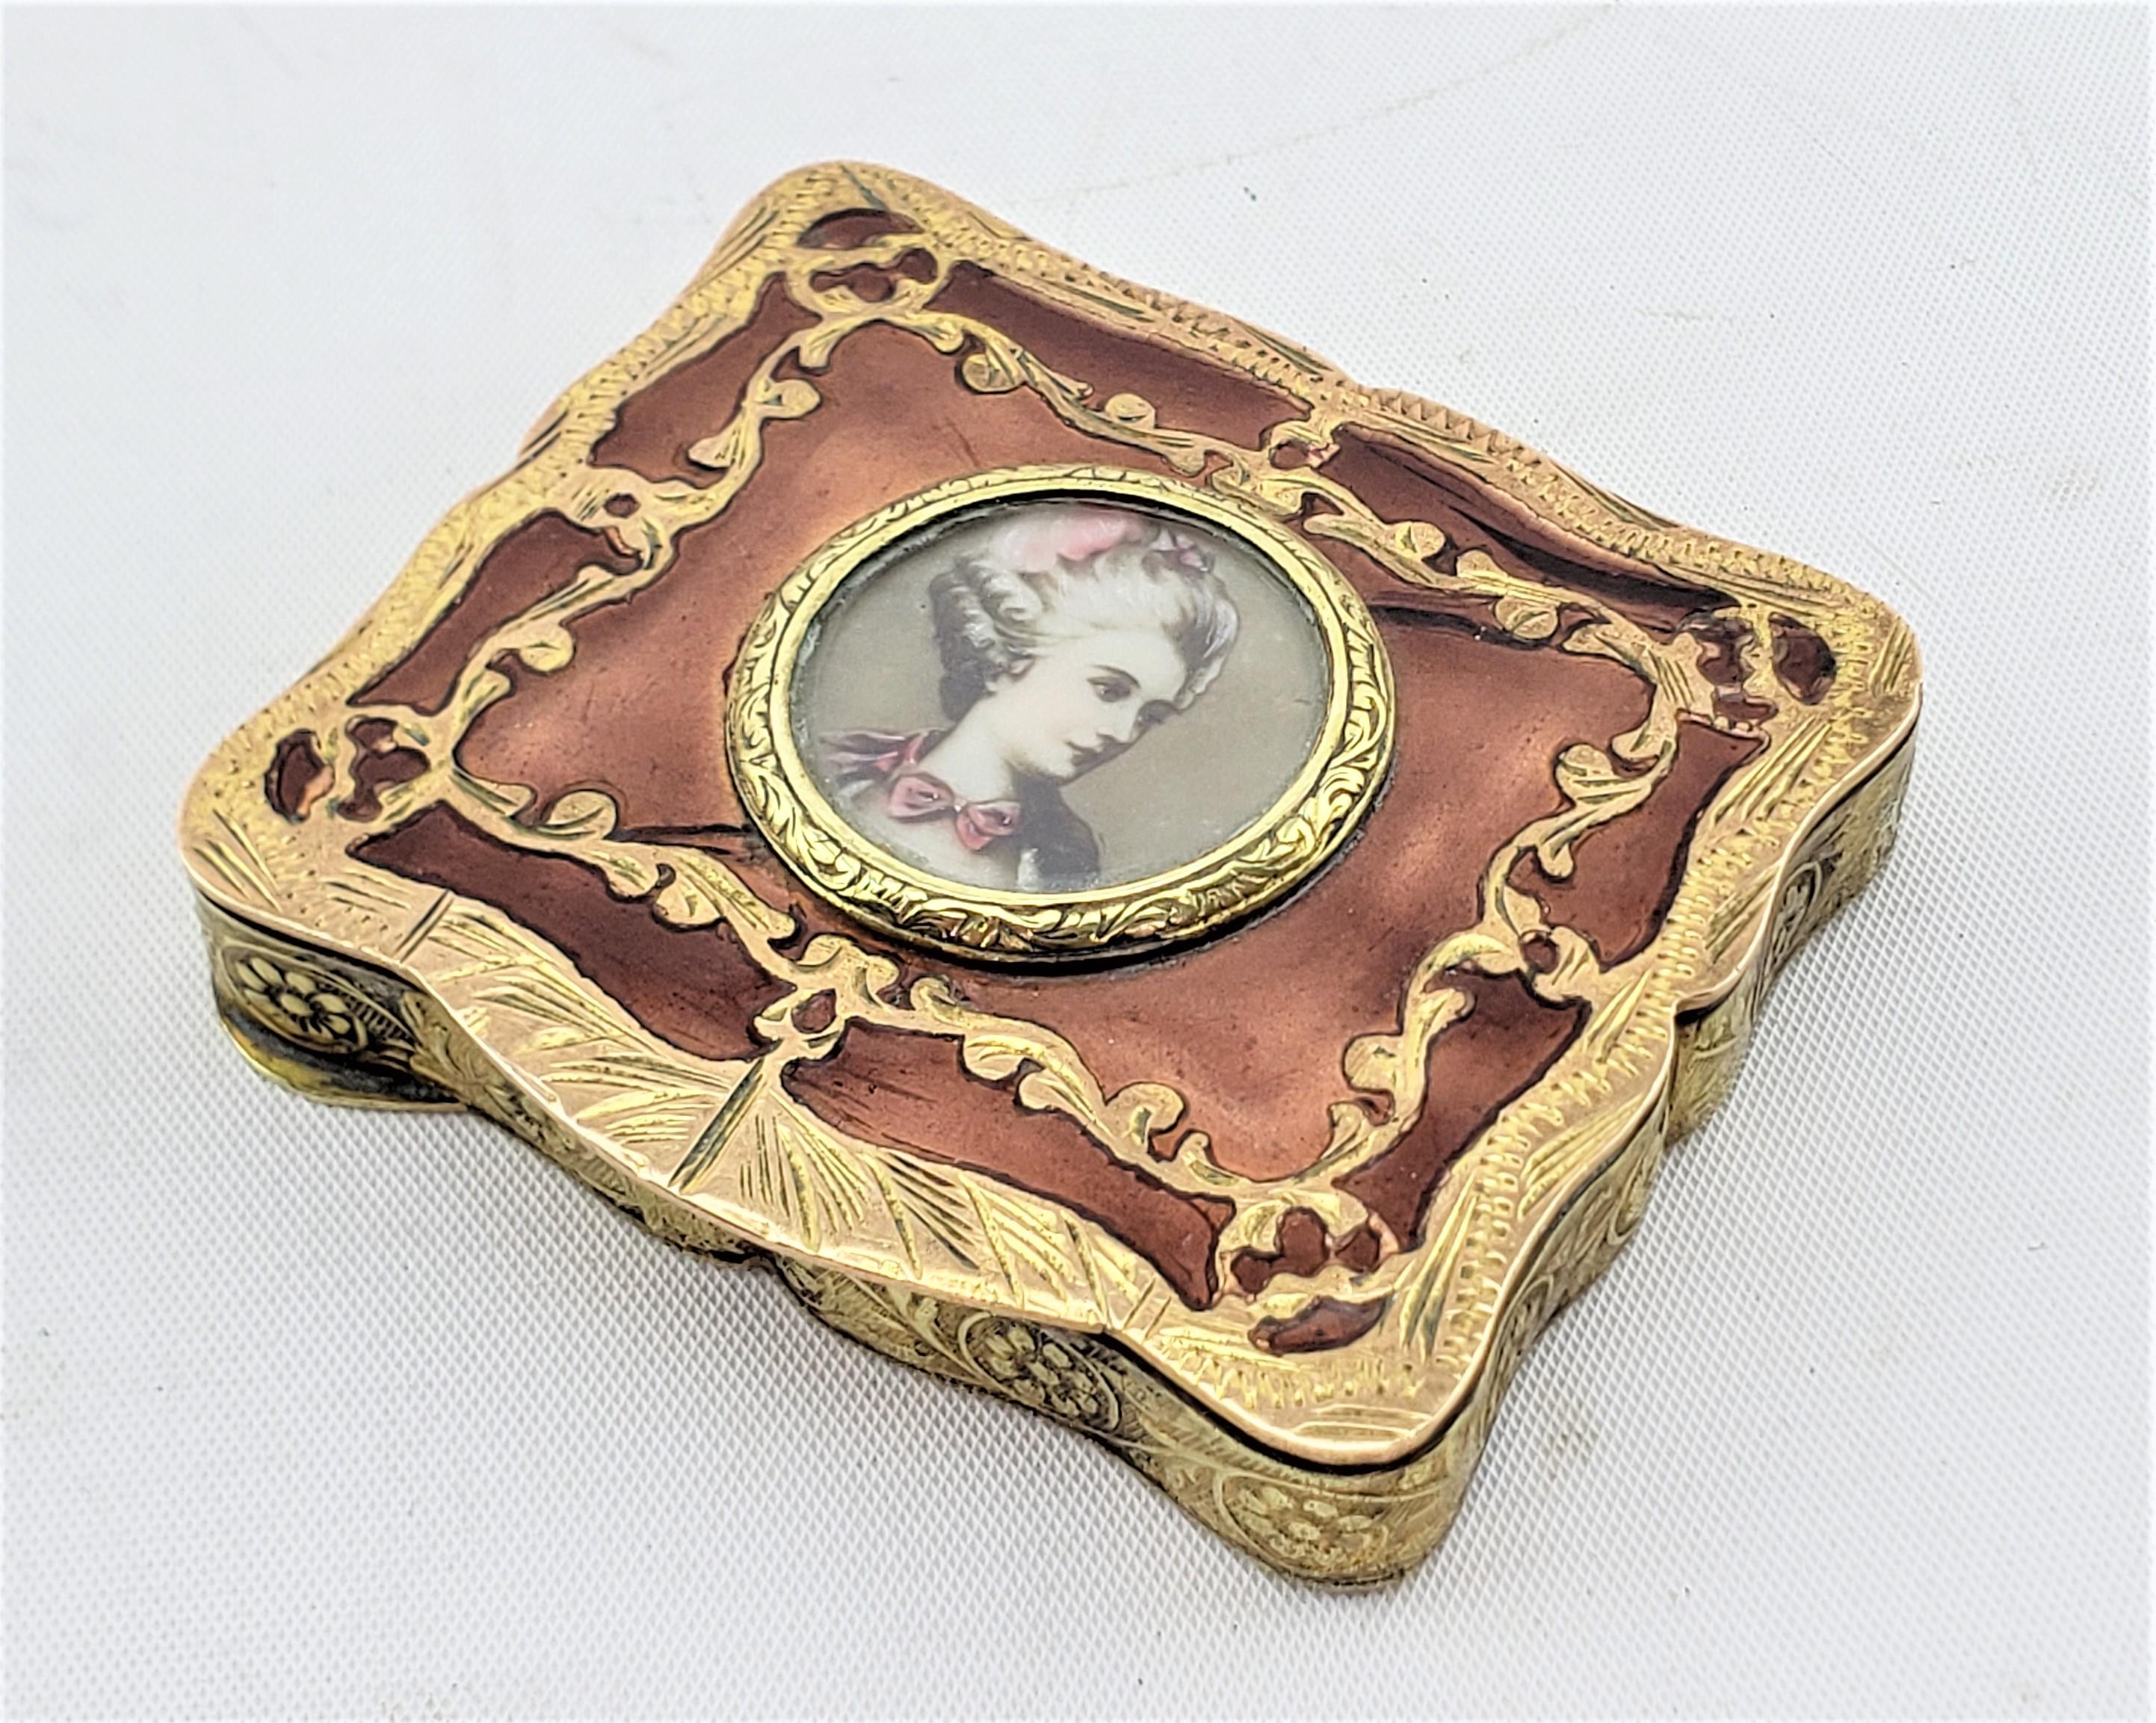 This antique miniature ladies compac is unsigned with respect to the maker, but originated from Italy and dates to approximately 1880 and done in a Renaissance Revival style. The box is composed of copper with ornate engraving on all sides and the